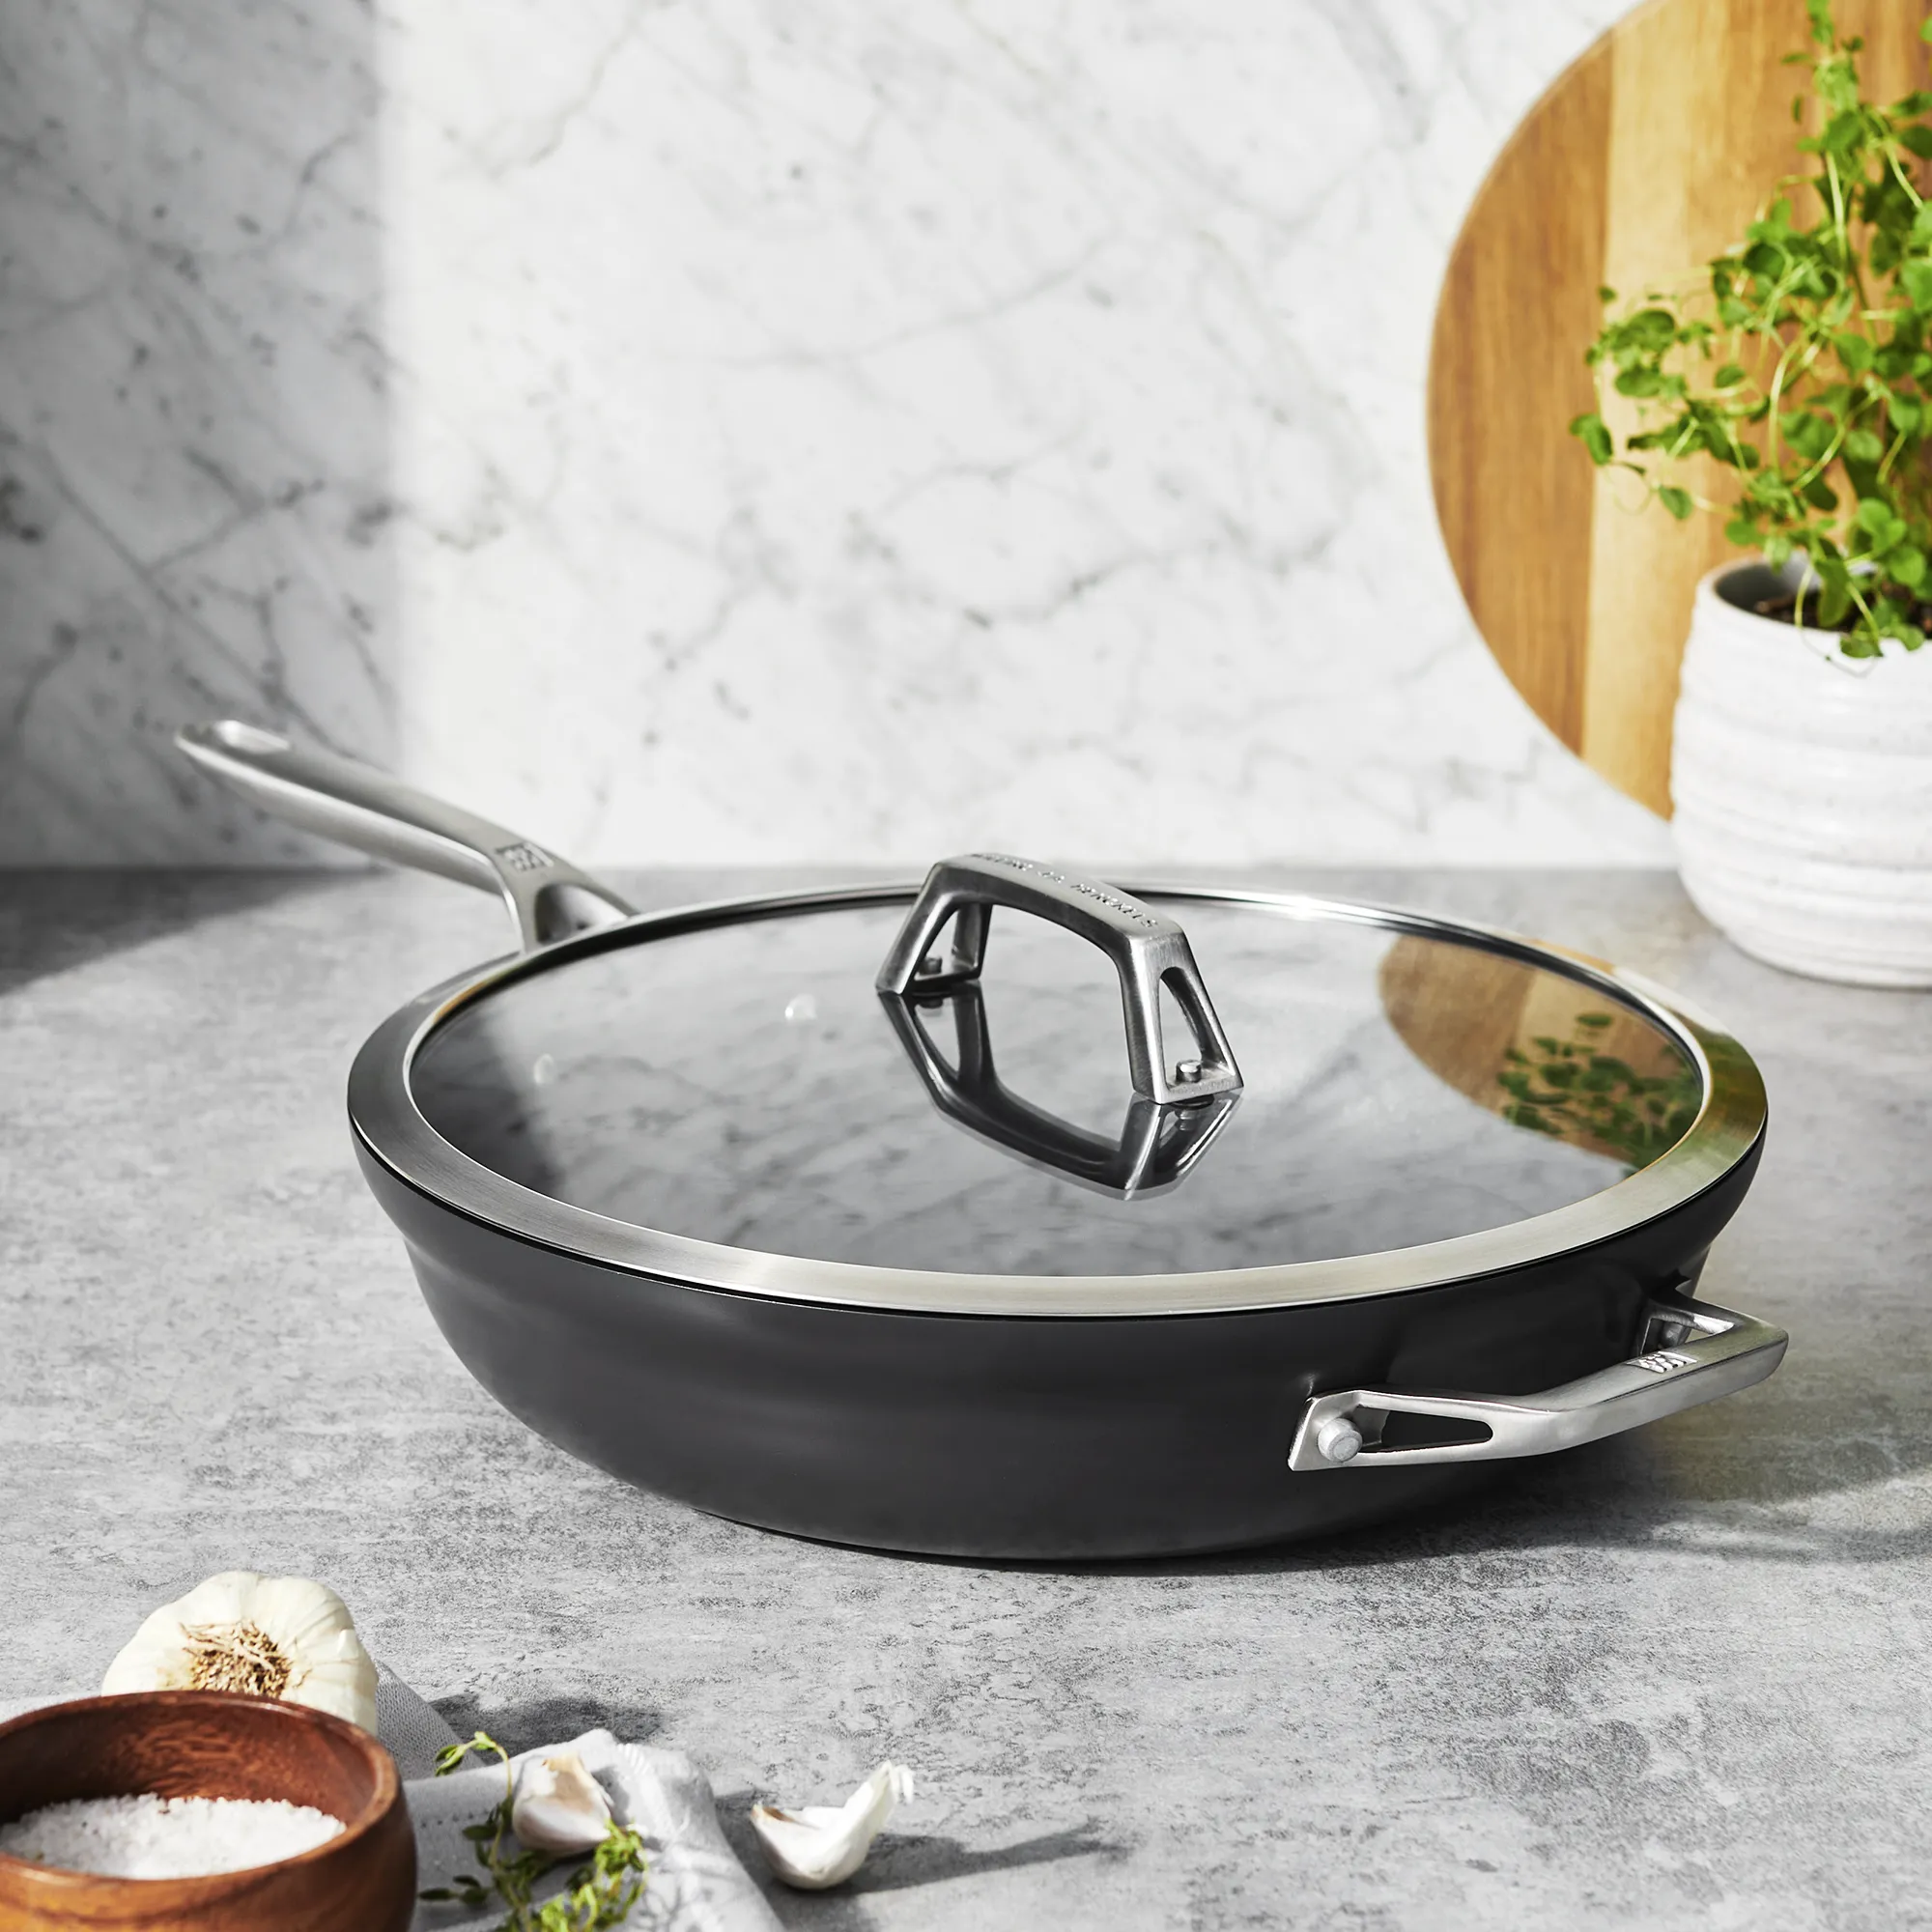 Zwilling Madura Plus Forged 5-qt Aluminum Nonstick Dutch Oven with Lid